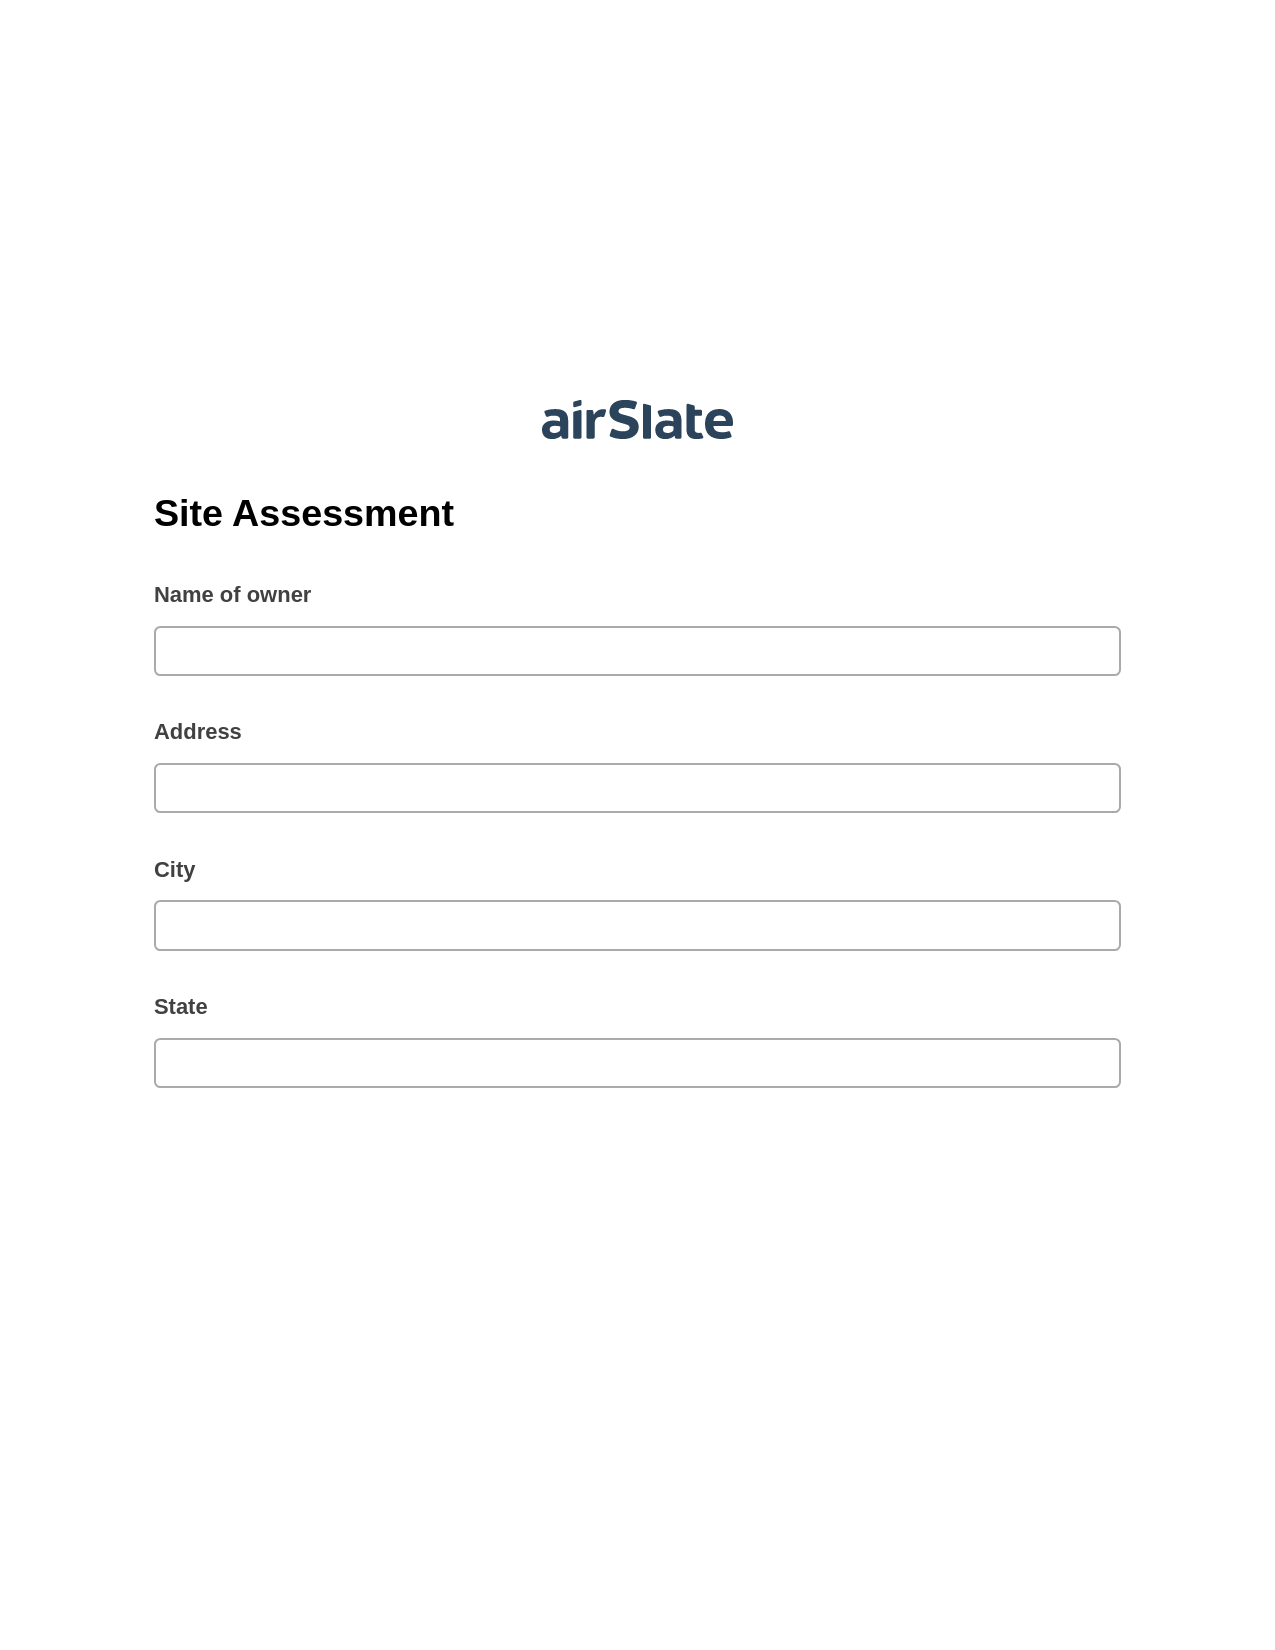 Site Assessment Pre-fill from CSV File Bot, Invoke Salesforce Process Bot, Export to Salesforce Bot